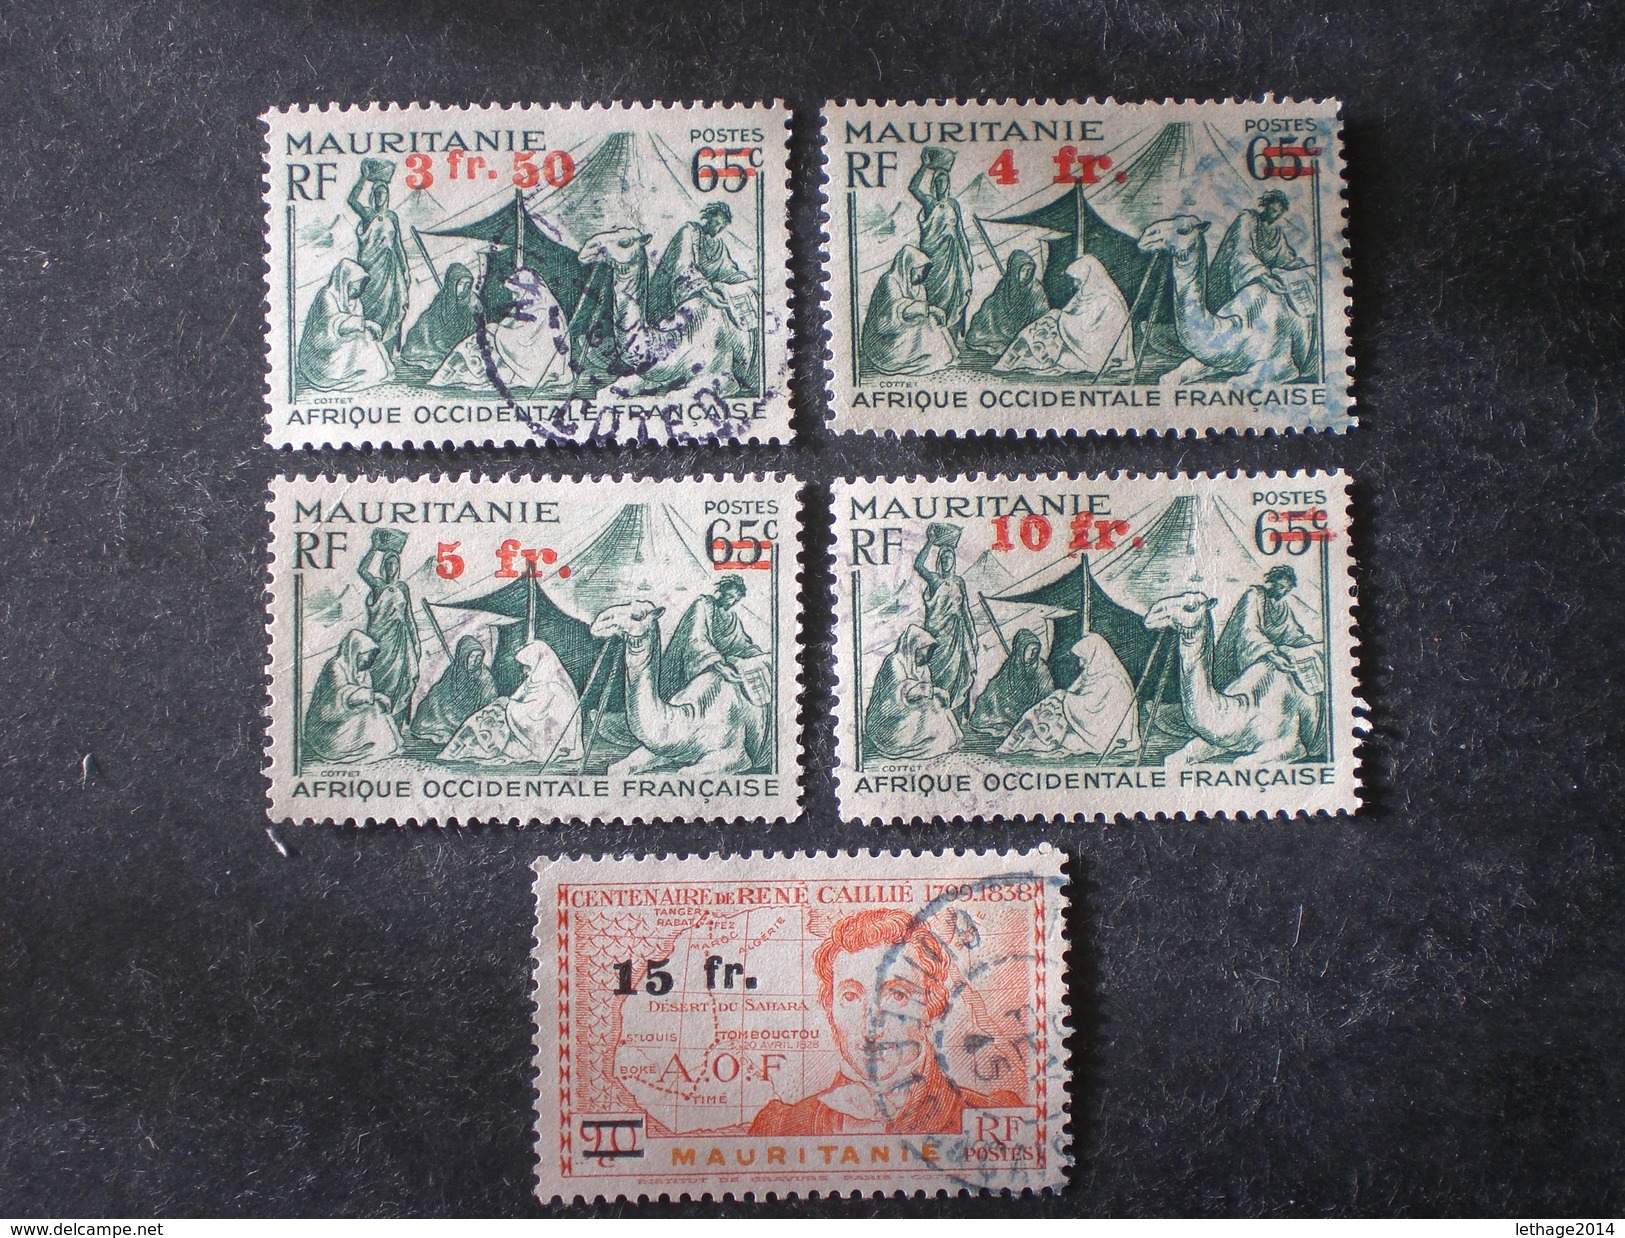 AOF MAURITANIA MAURITANIE موريتانيا Mauritanië 1944 Issues Of 1938 And 1939 Surcharged - Gebraucht